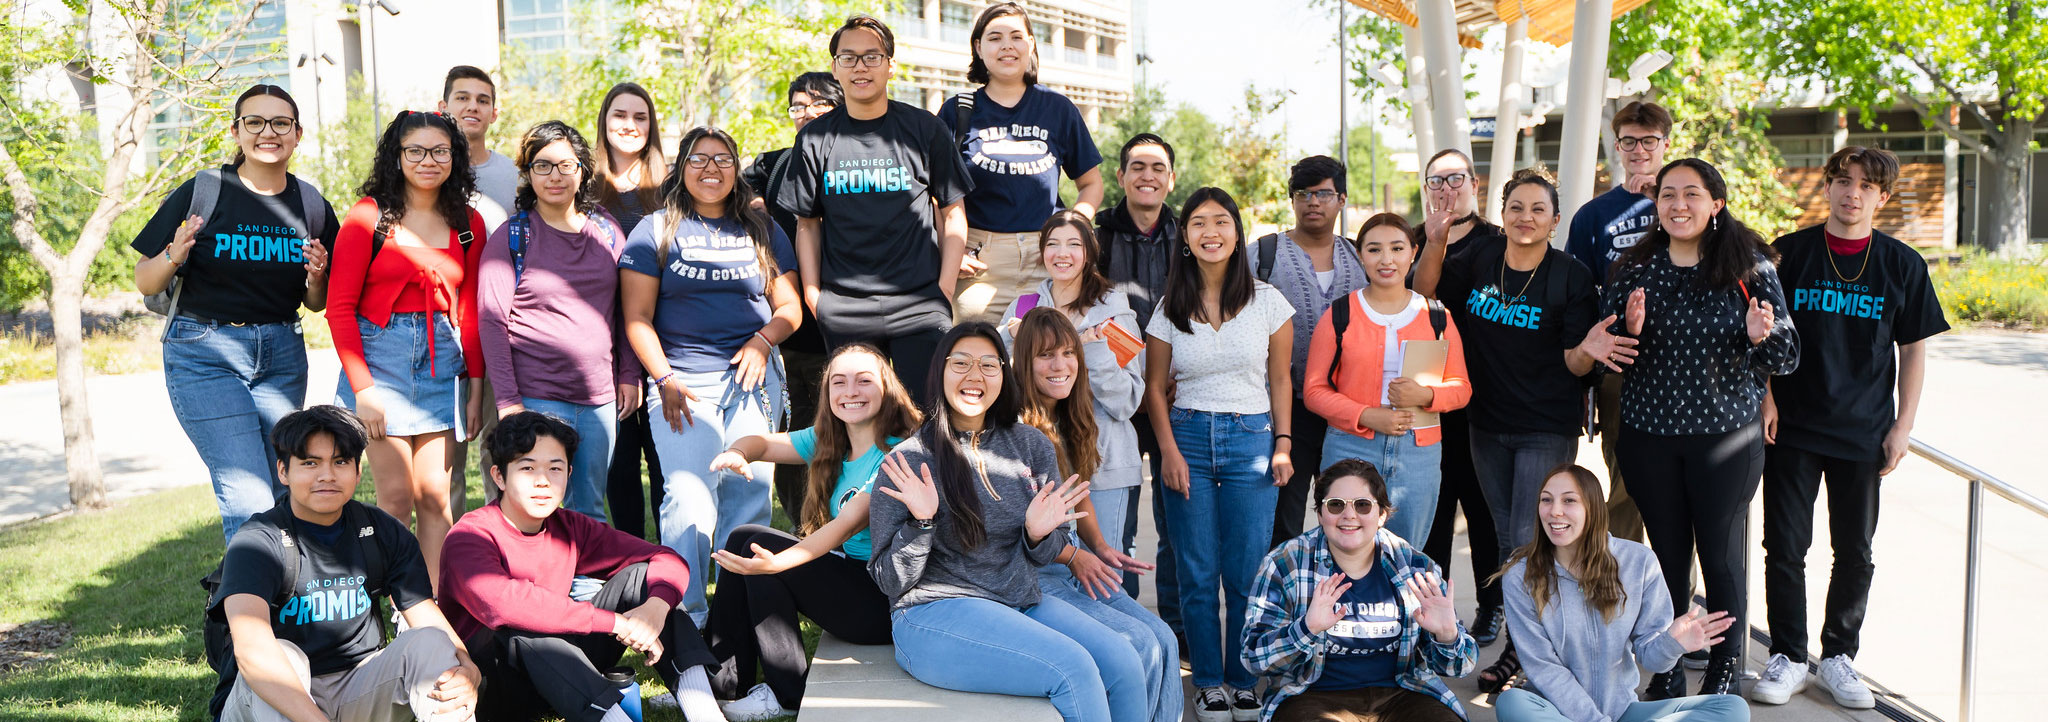 27 promise students are photographed as a group outsitde in the Mesa Quad.